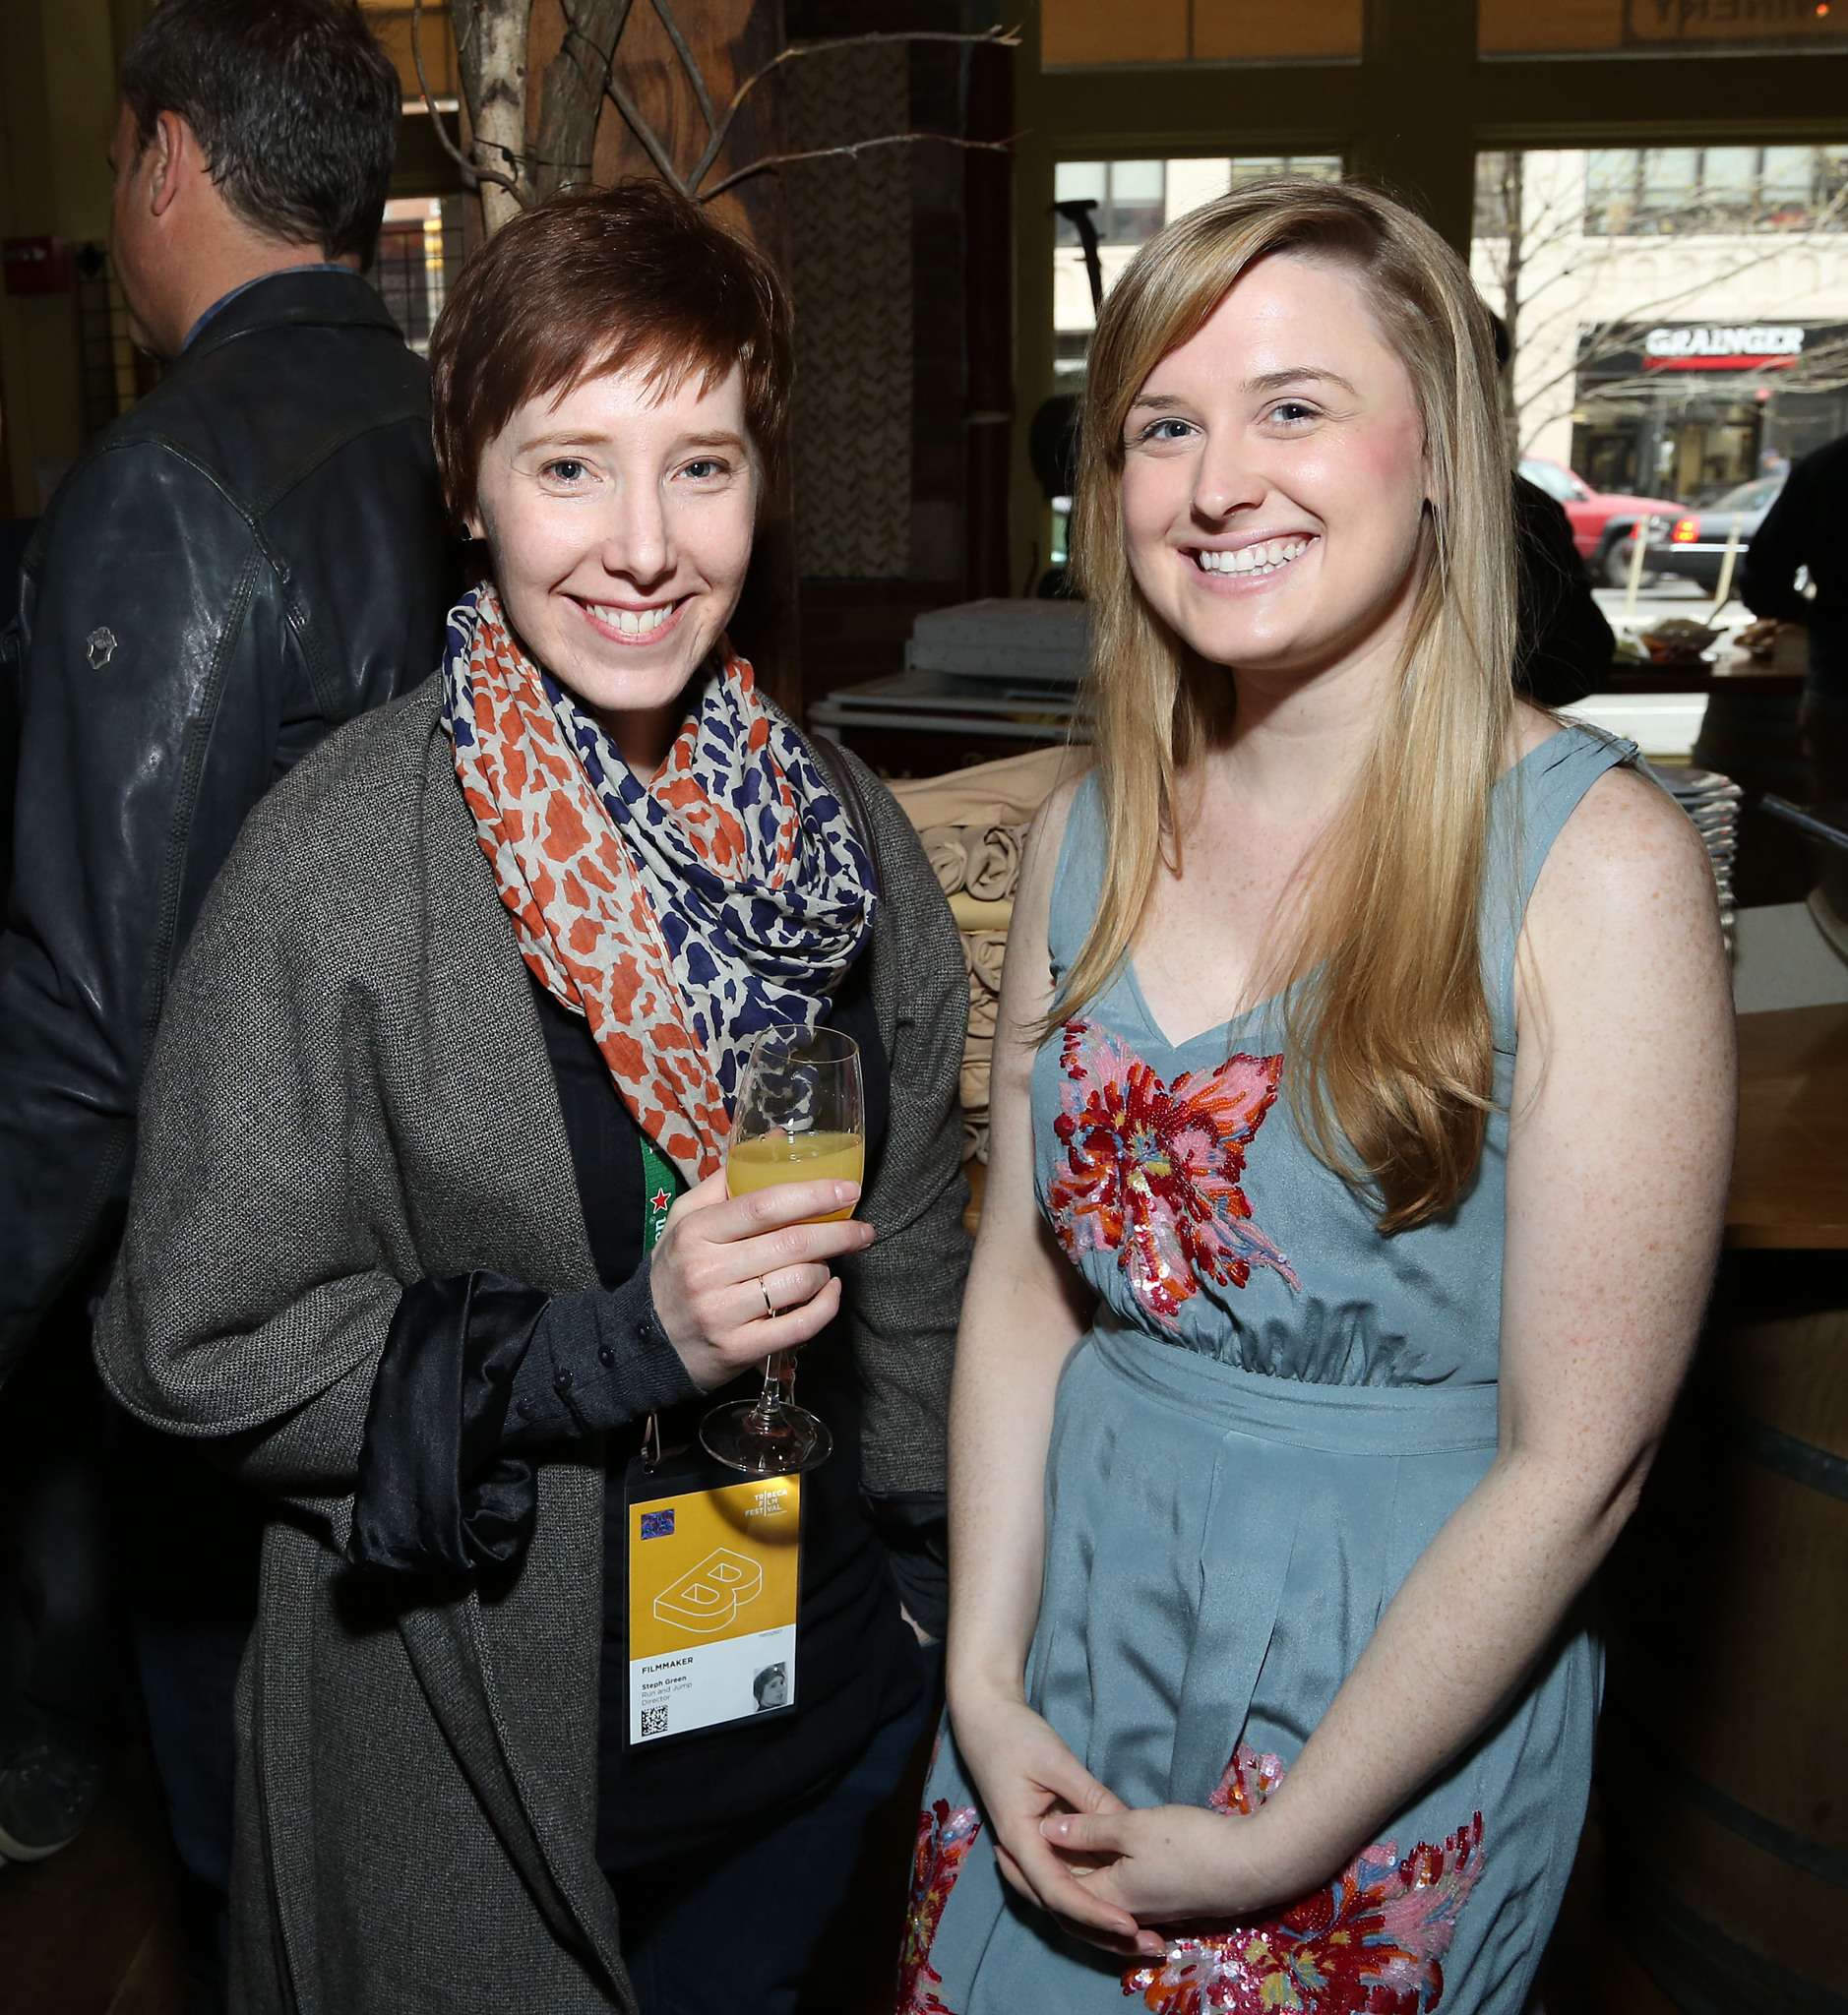 Steph Green (L) and Erica Cusumano attend the Directors Brunch during the 2013 Tribeca Film Festival on April 23, 2013 in New York City.